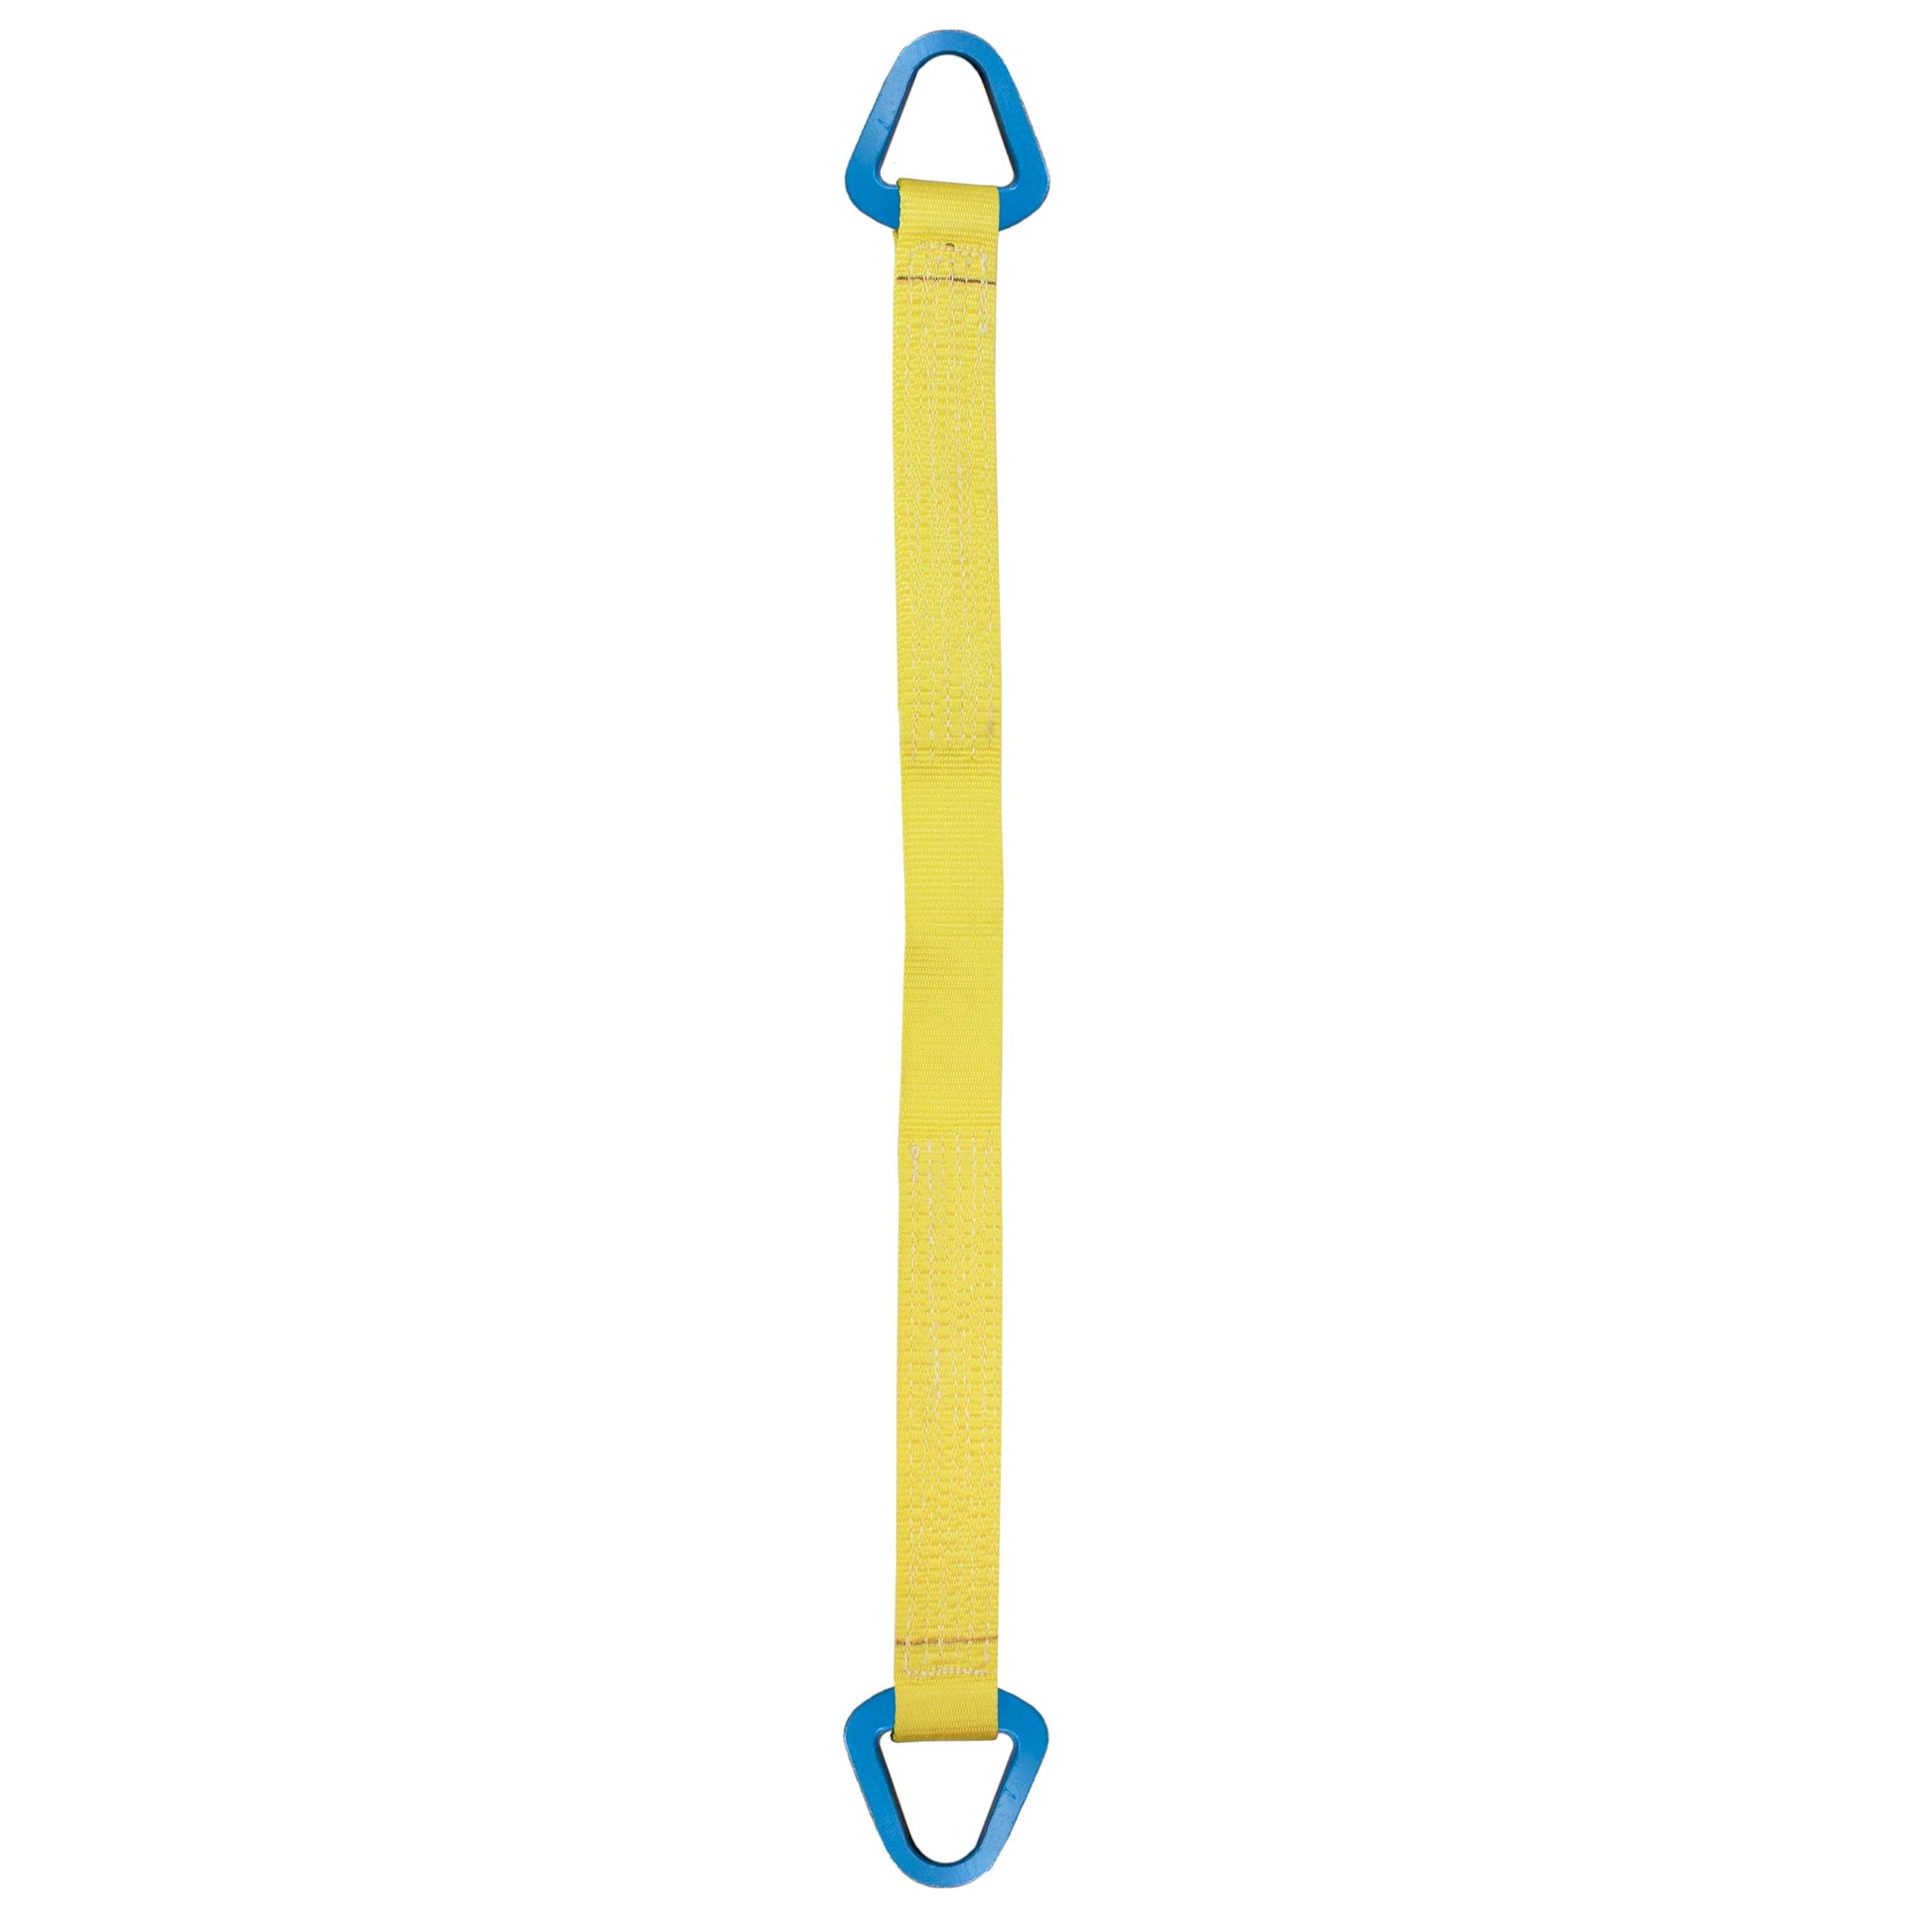 Nylon Lifting Sling Triangle 8 inch x 10 foot 2ply image 1 of 2